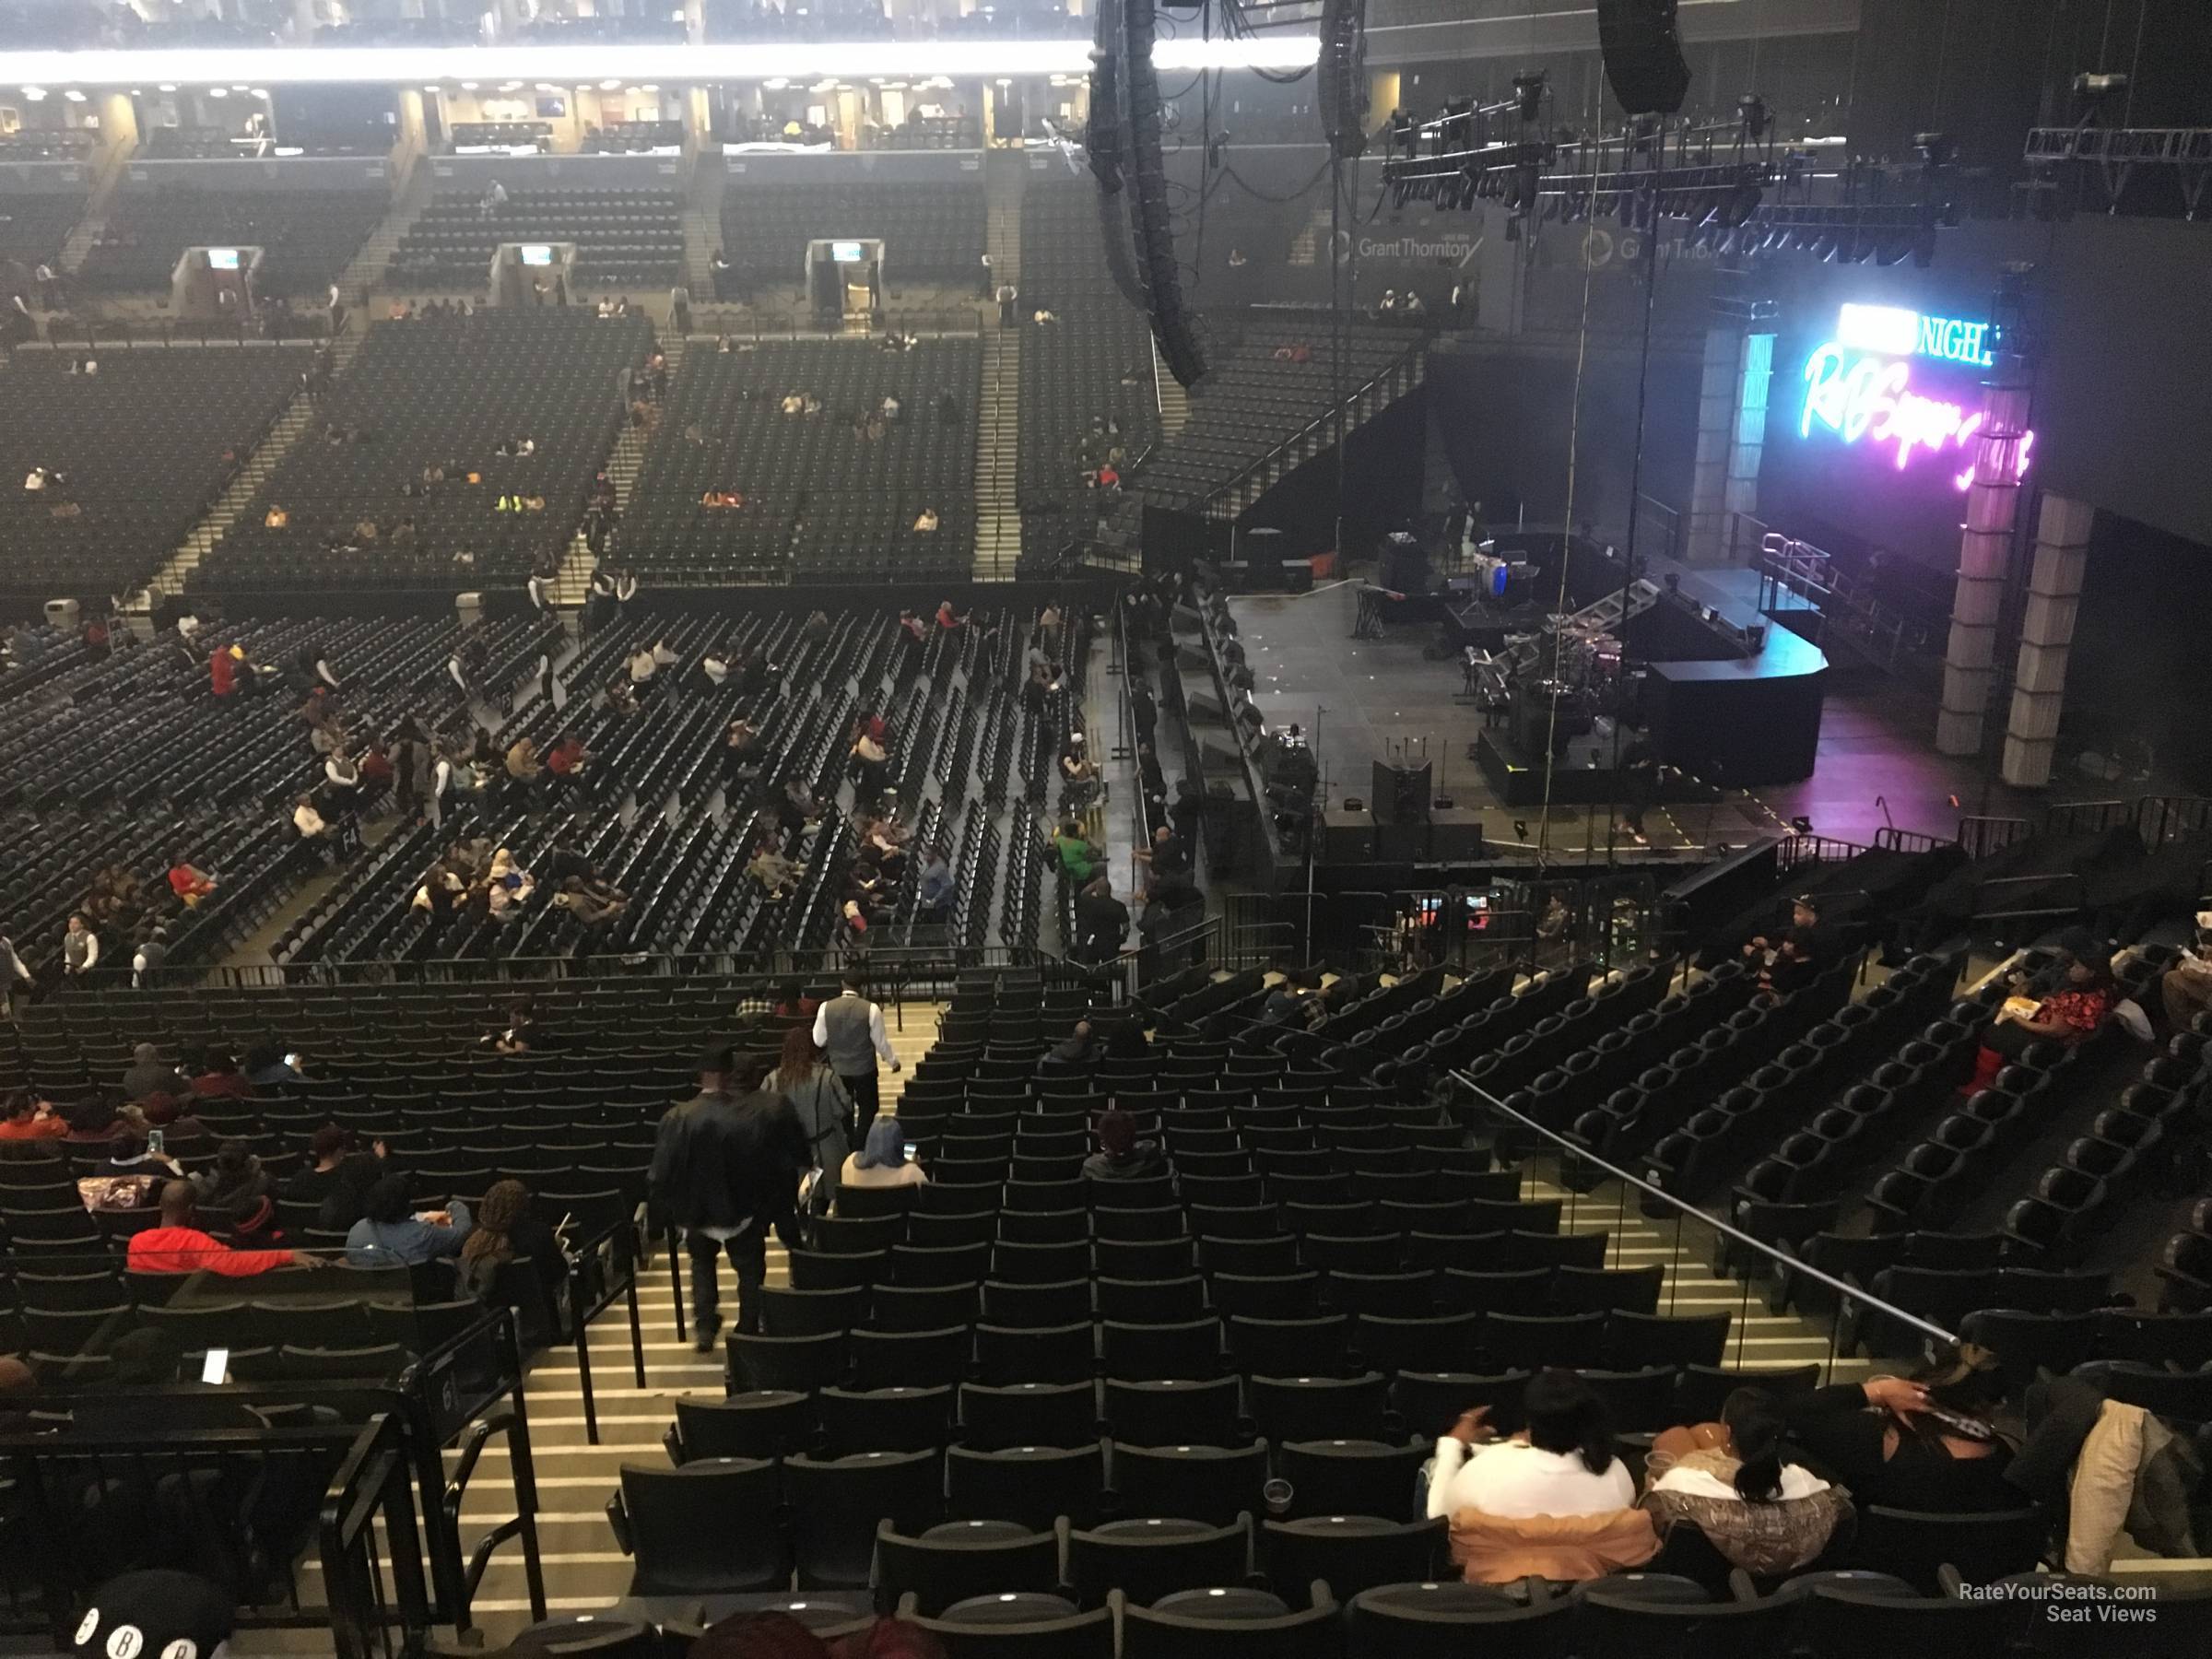 section 106, row 6 seat view  for concert - barclays center